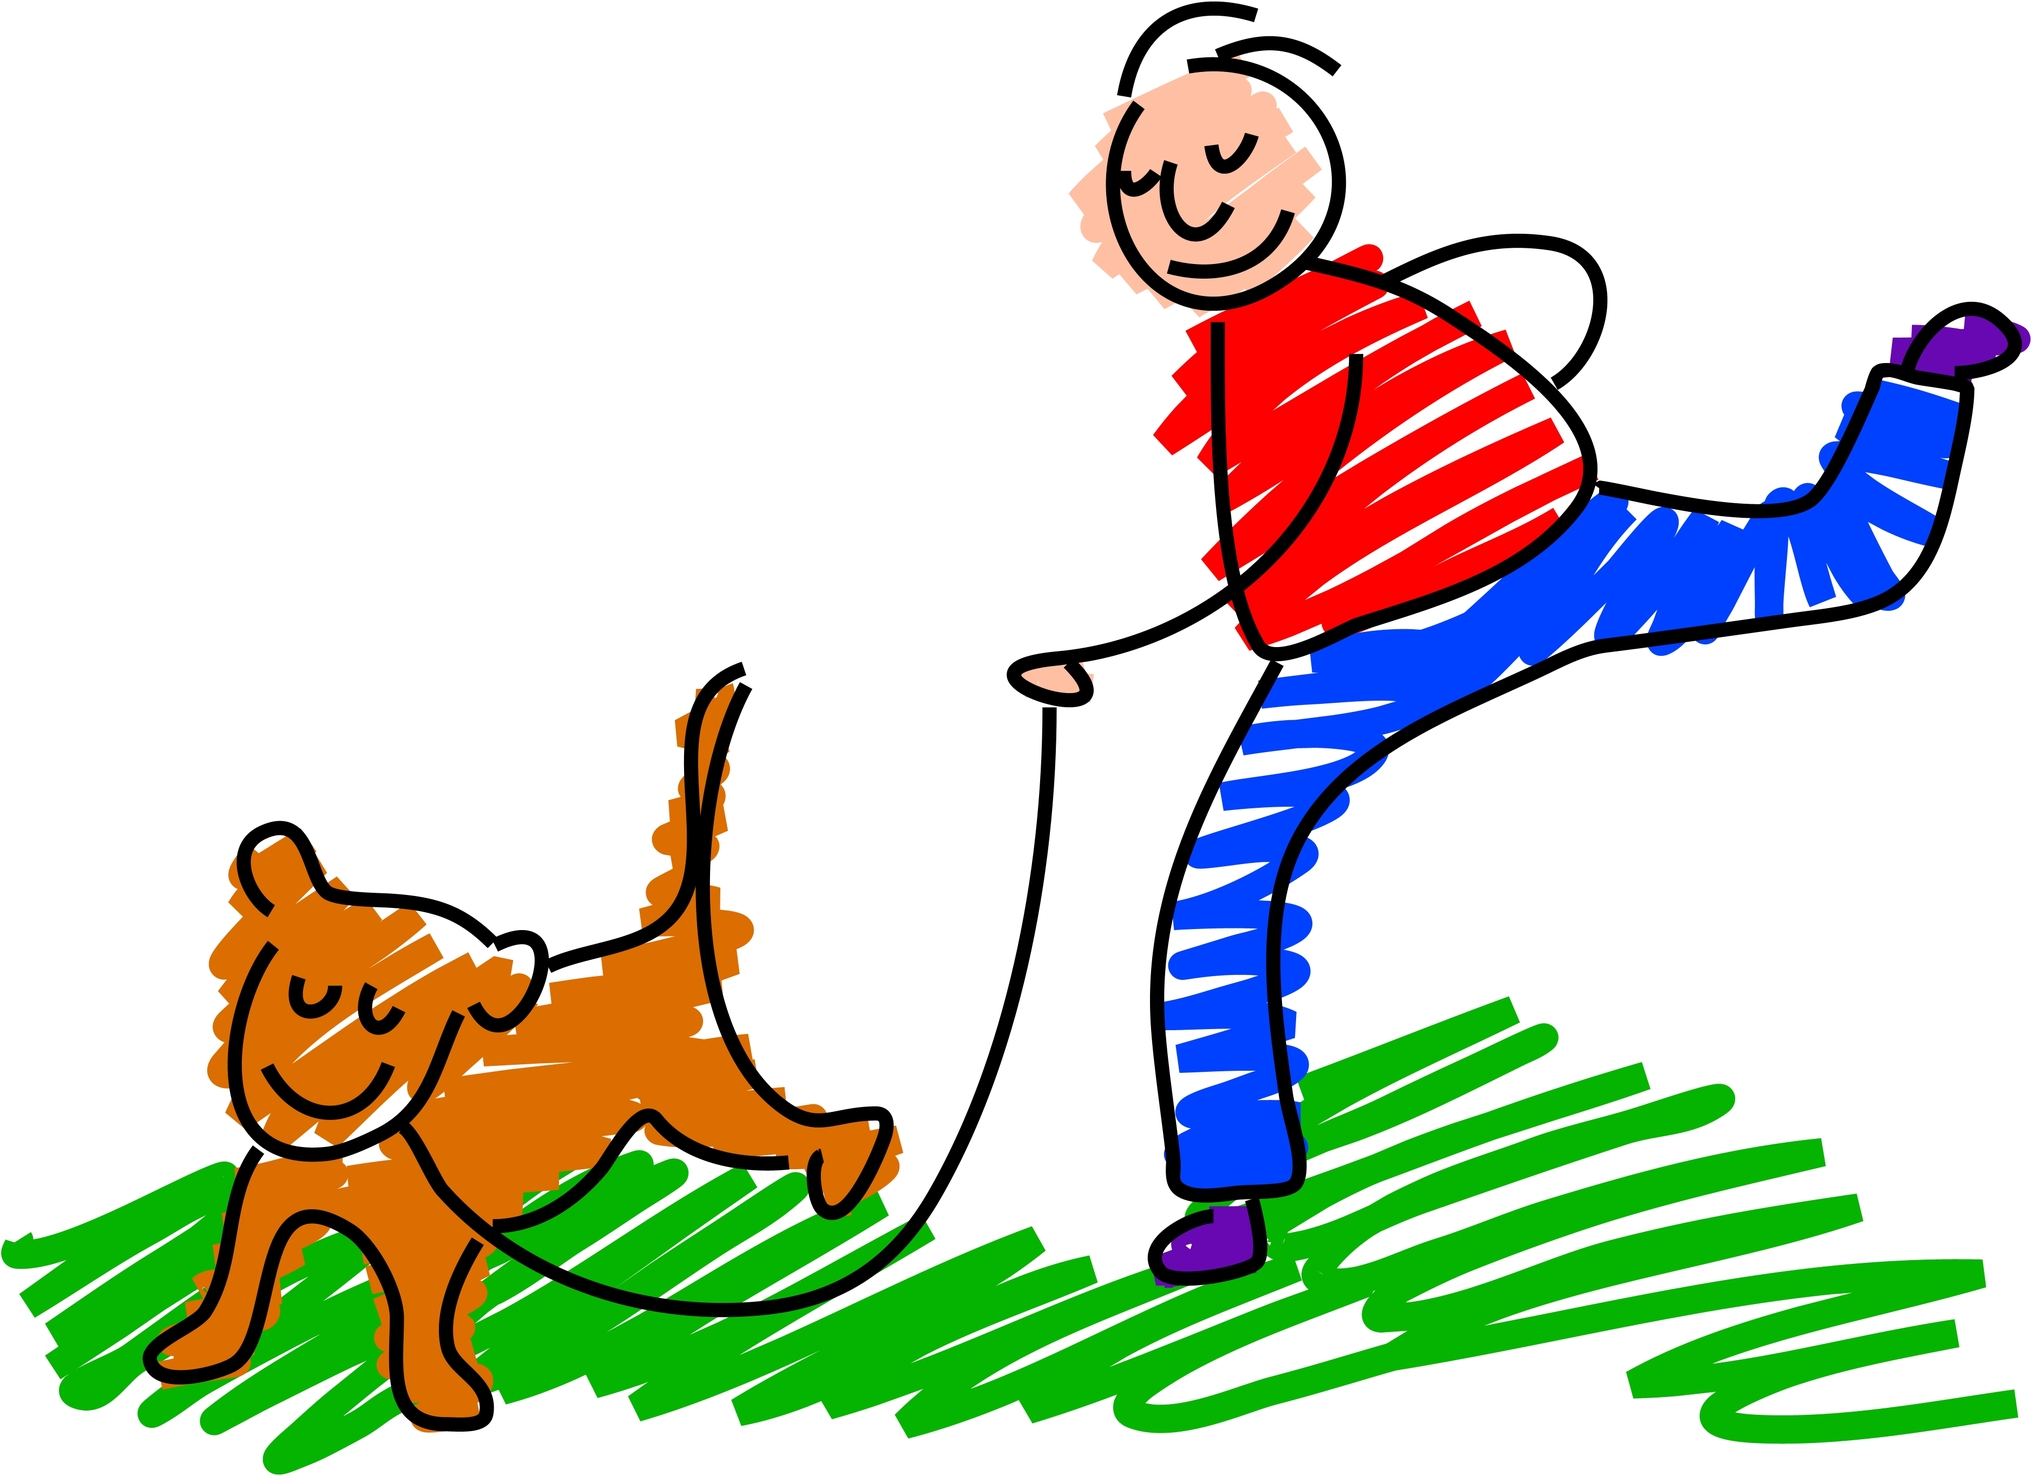 Make dog-walking part of your healthy active lifestyle.